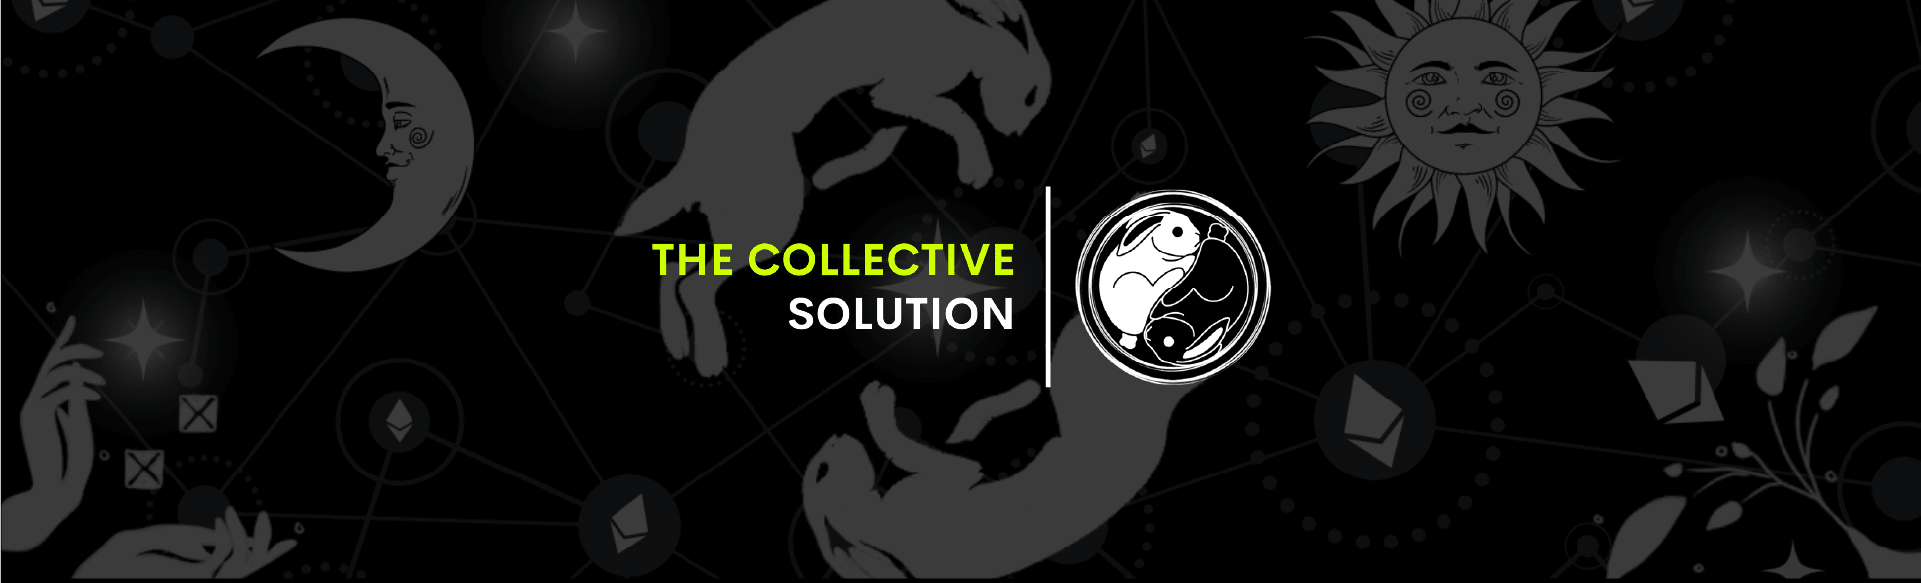 The Collective Solution Book Hotels with Crypto